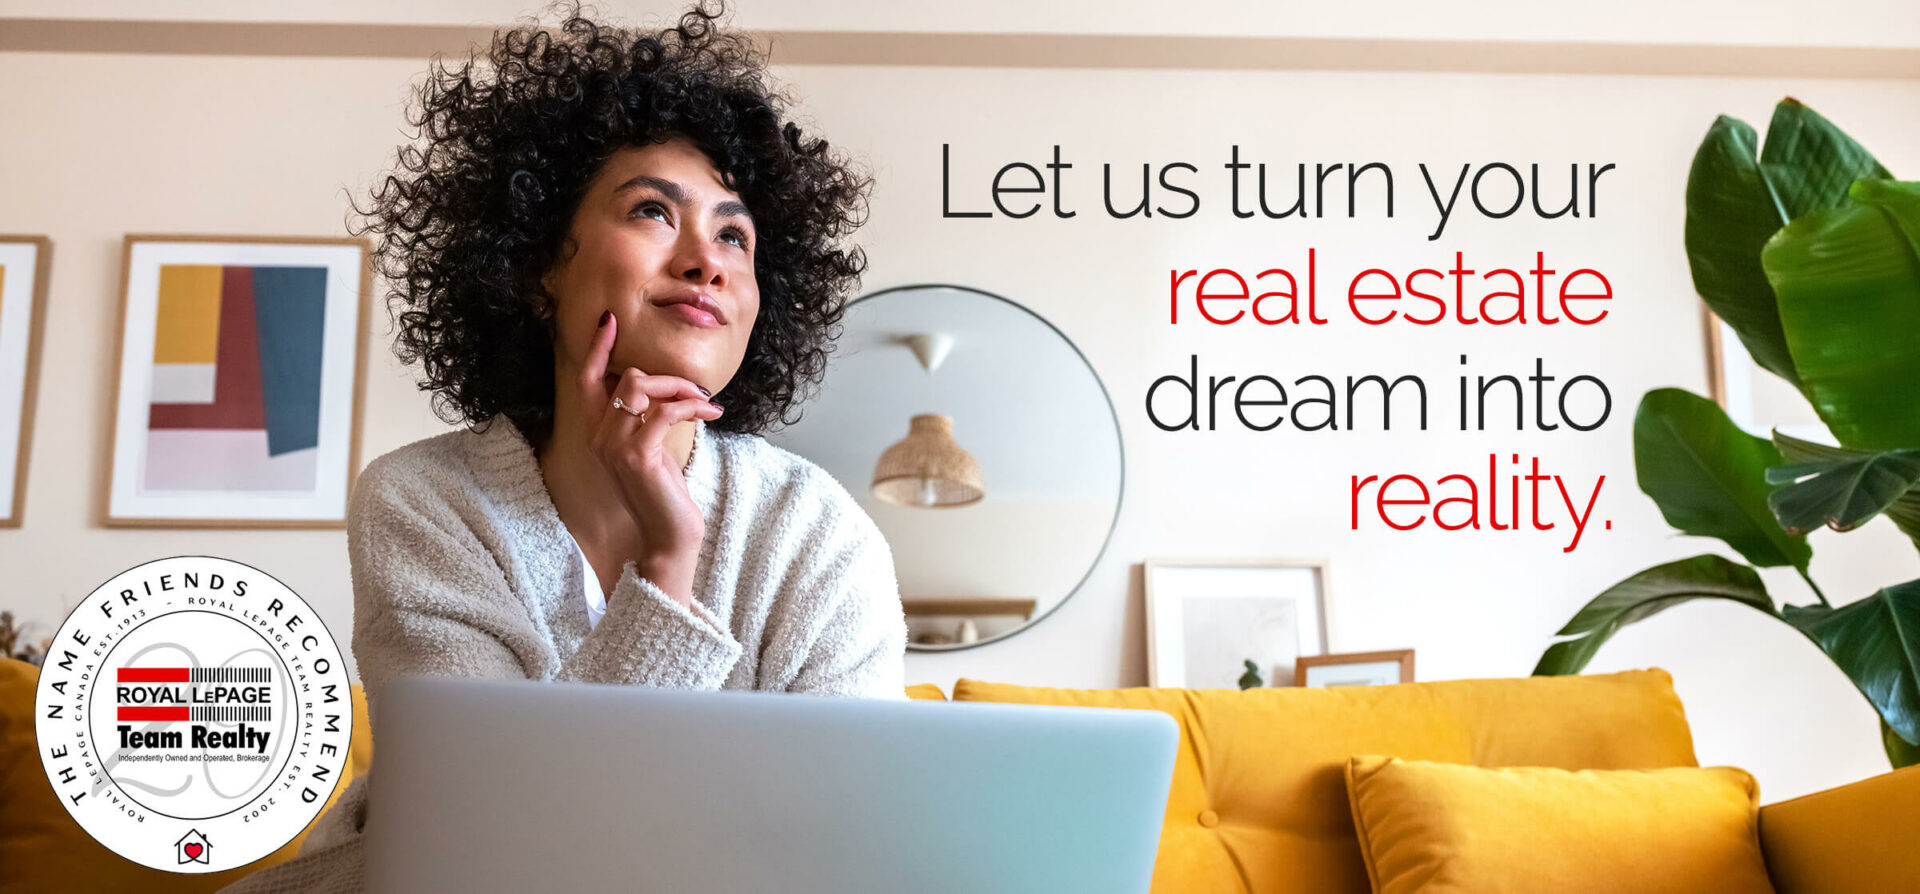 Turn your real estate dream into reality